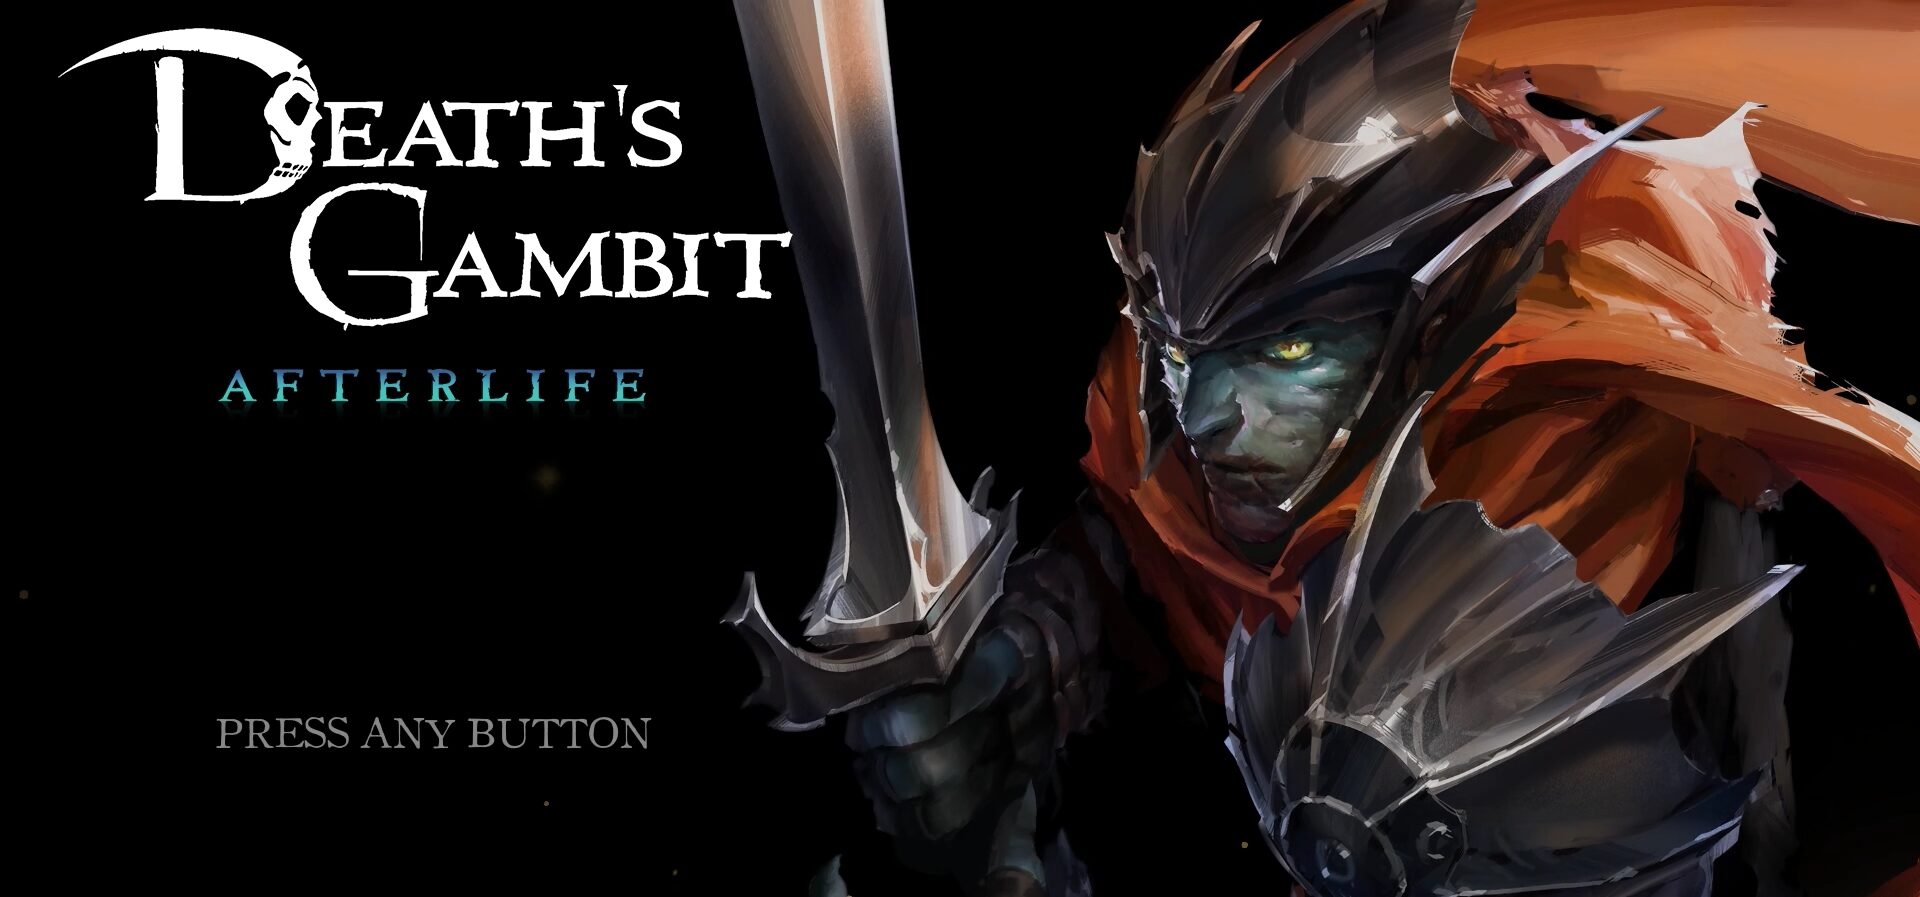 Death's Gambit Review 